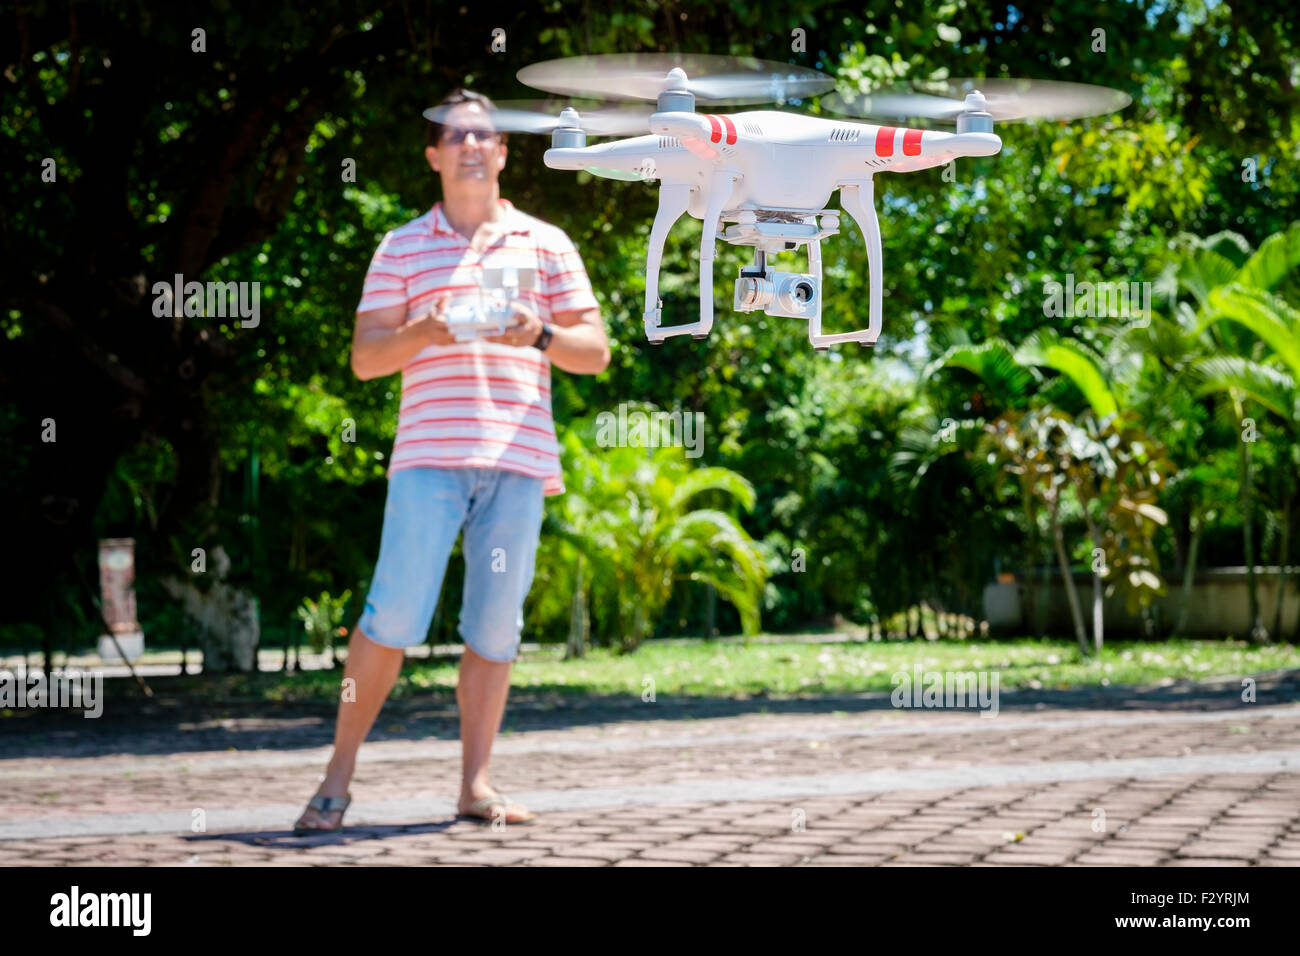 Caucasian man using remote control to operate a quadcopter drone hovering in air. Stock Photo